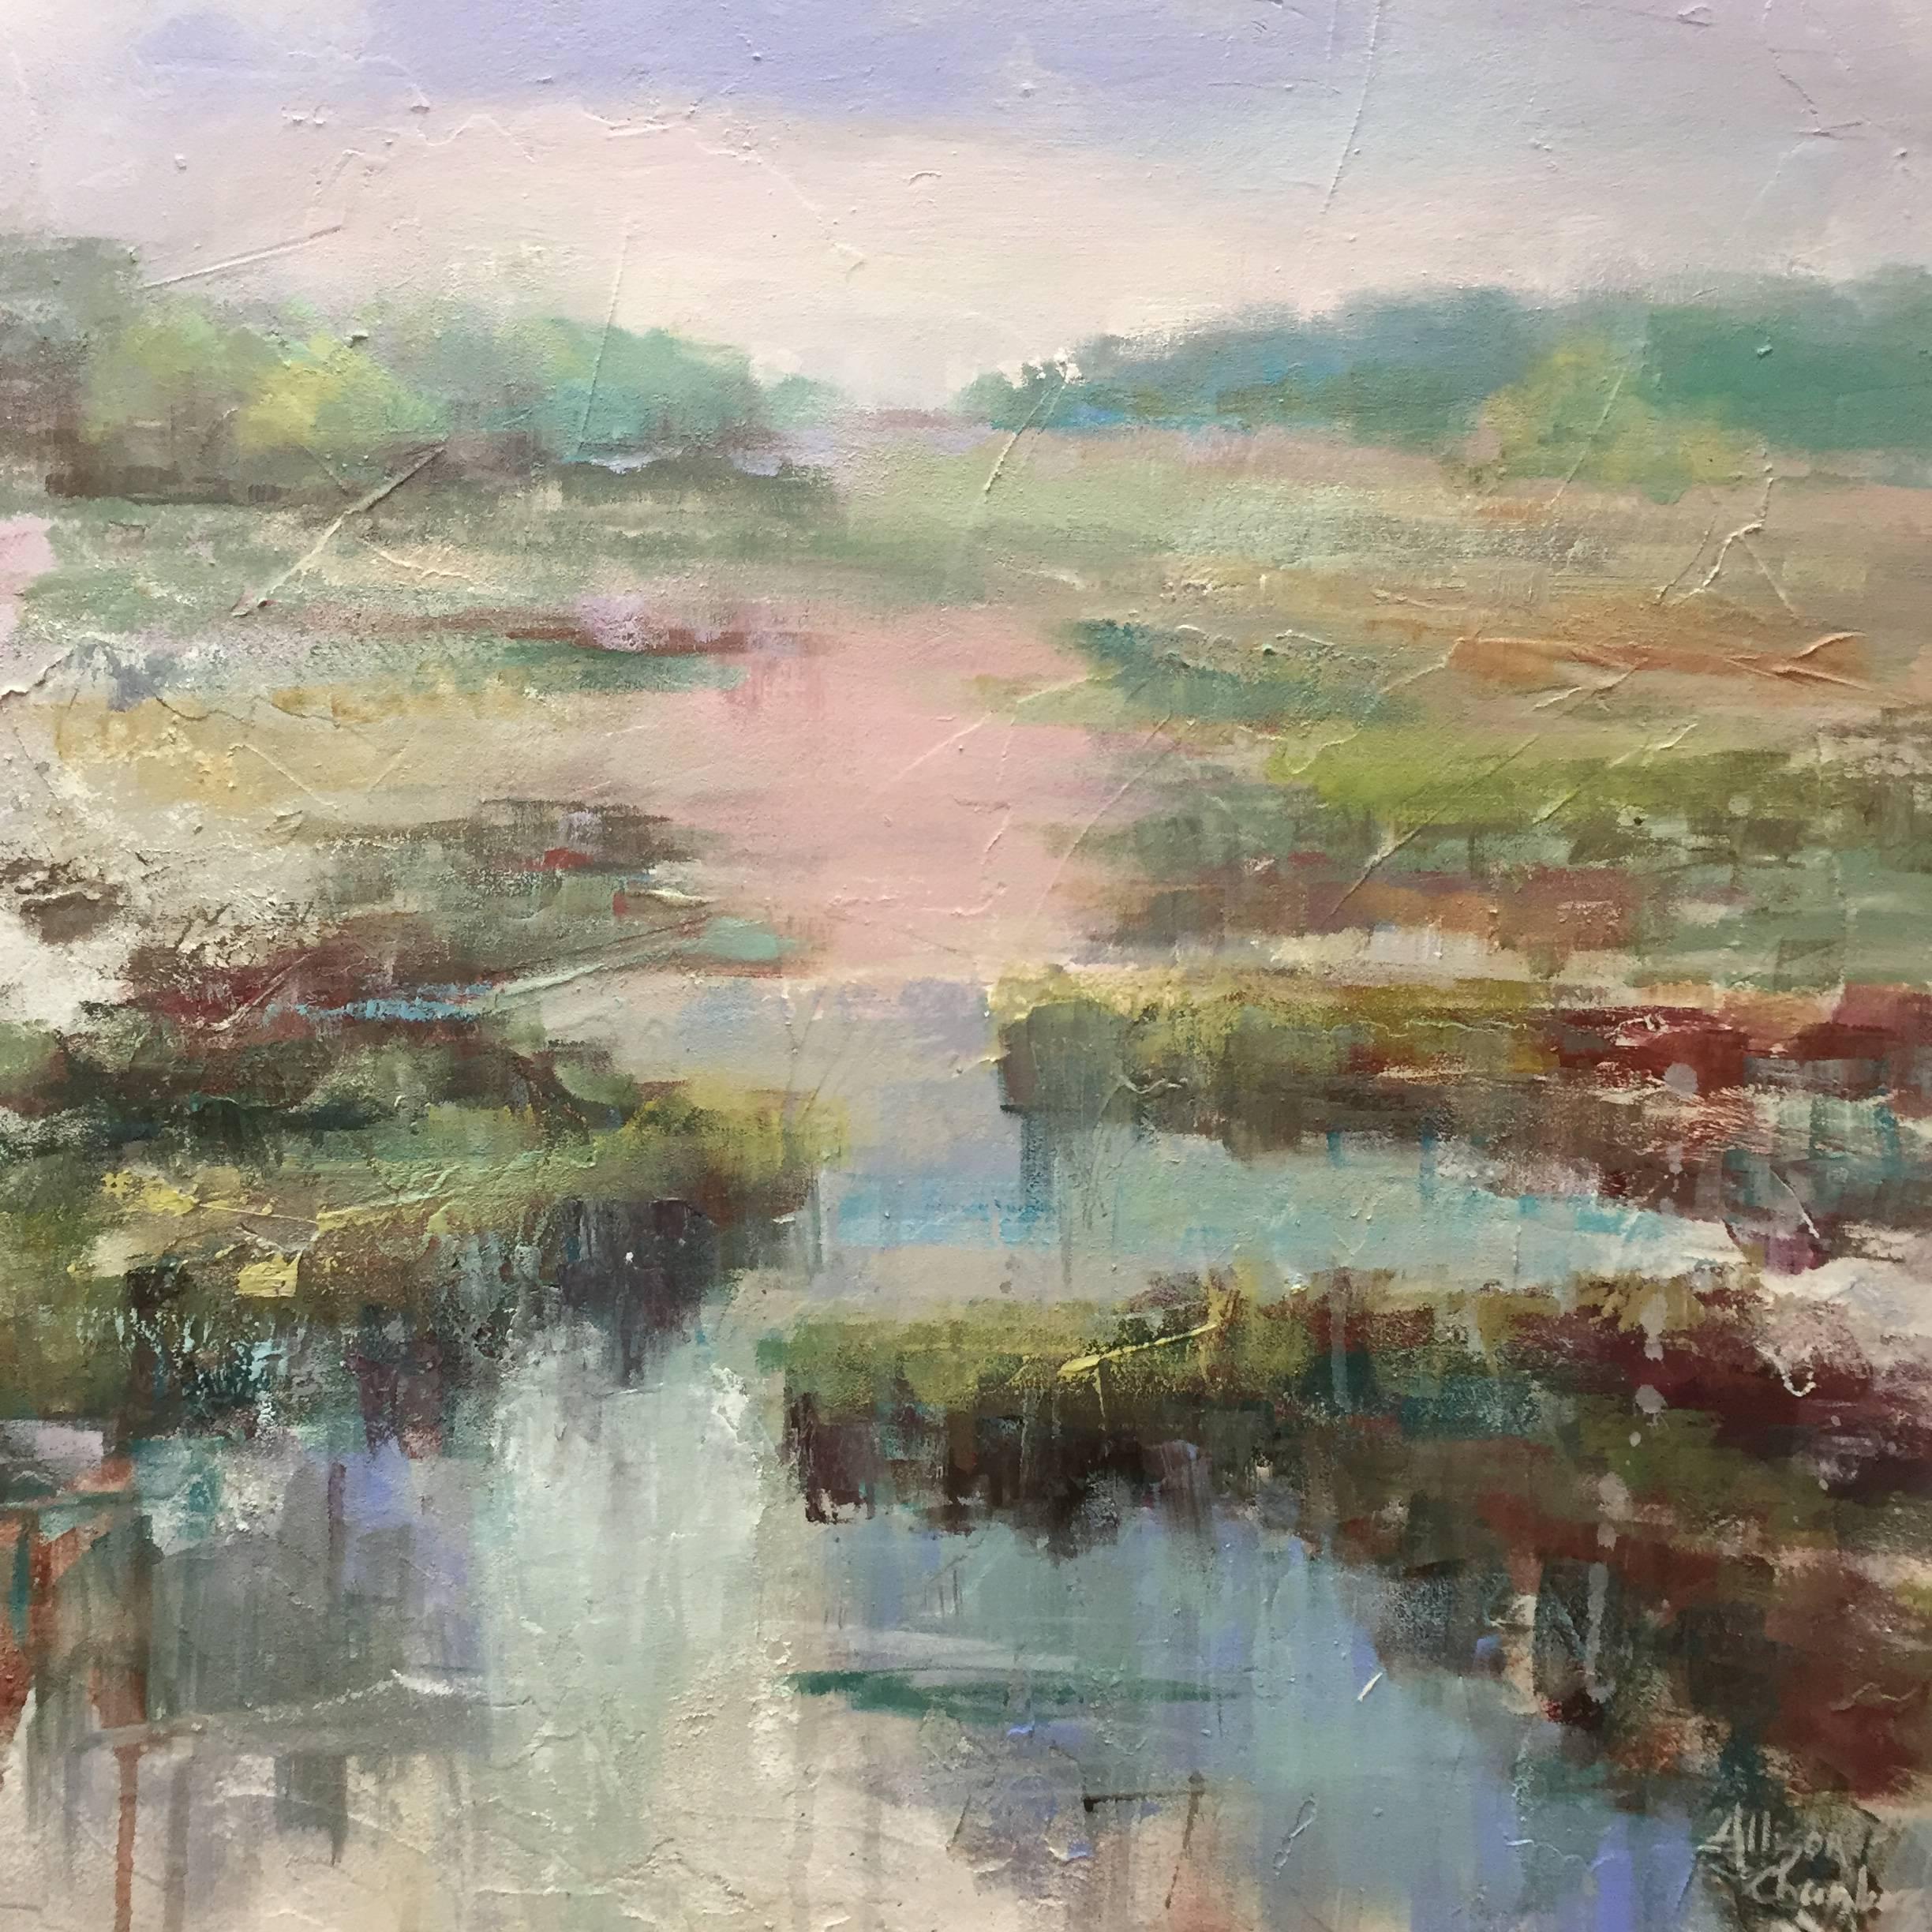 'Happy Place I' is a medium size framed mixed media on board painting created in 2017 by American artist Allison Chambers. Featuring a landscape scene mixing vegetation and the water element, the artist used a soft palette made of green, blue, pink,